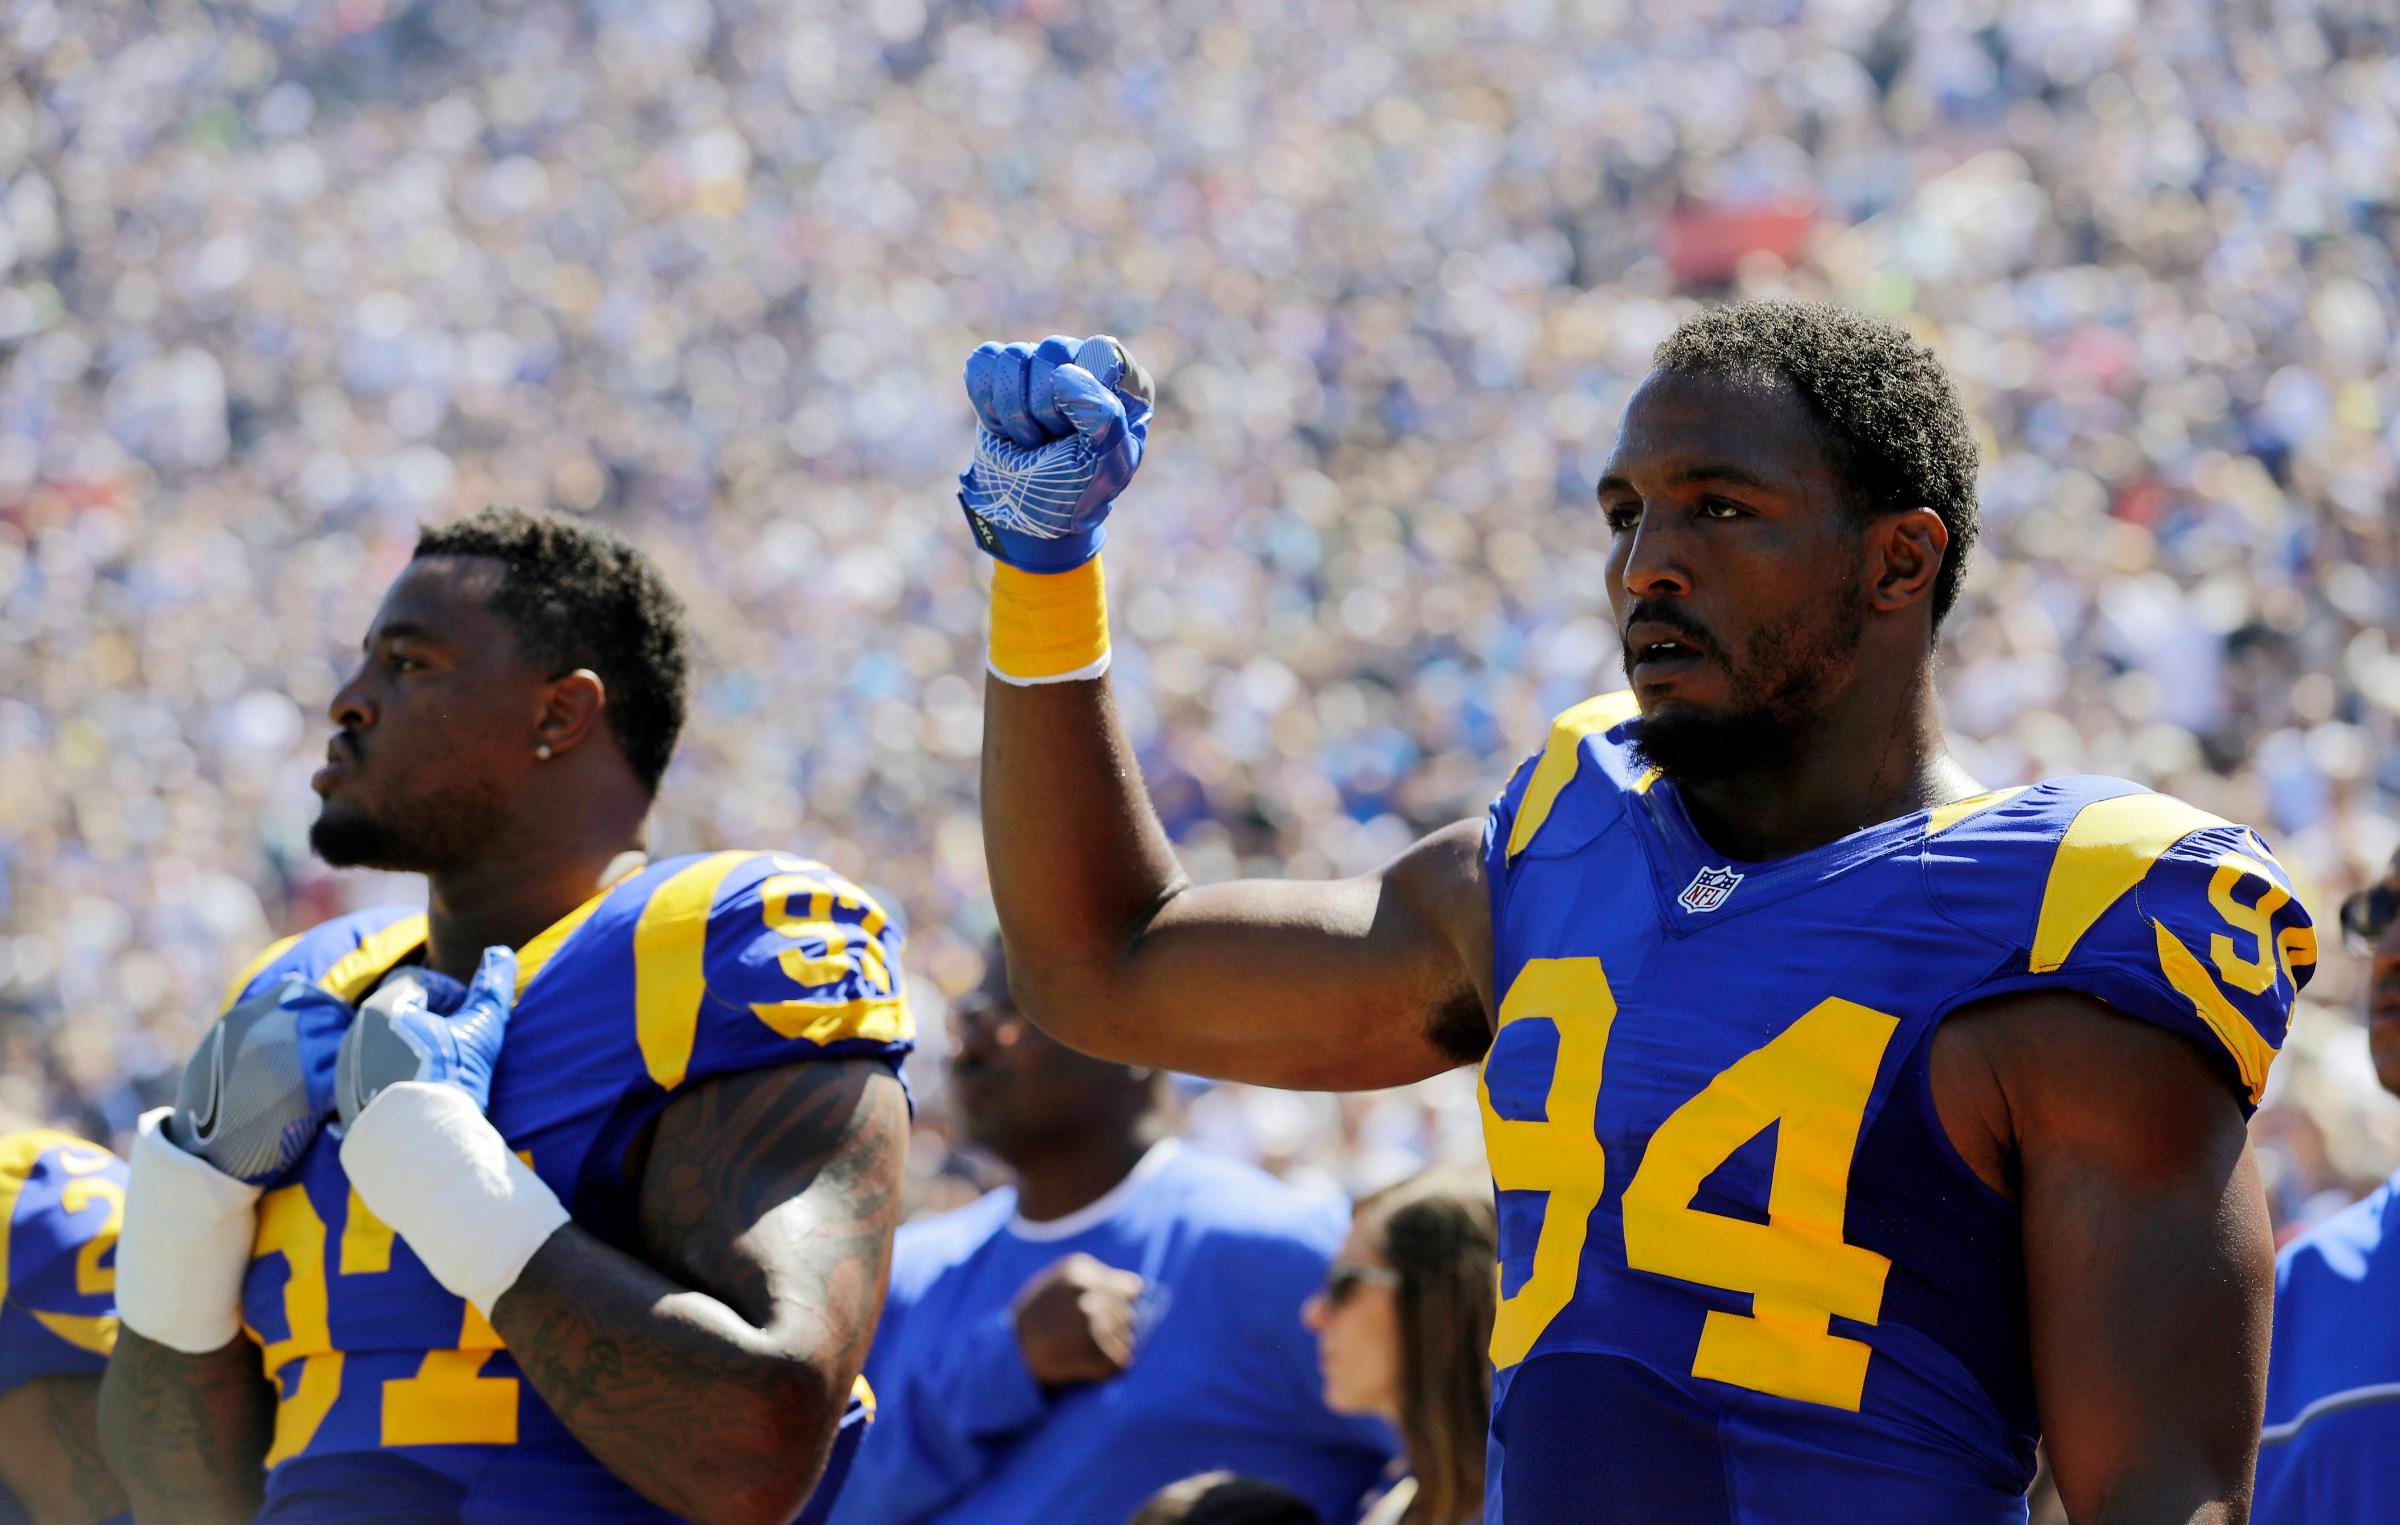 Los Angeles Rams defensive end Robert Quinn, right, raises his fist during the national anthem prior to an NFL football game against the Seattle Seahawks at Los Angeles Memorial Coliseum in Los Angeles, Sept. 18, 2016.